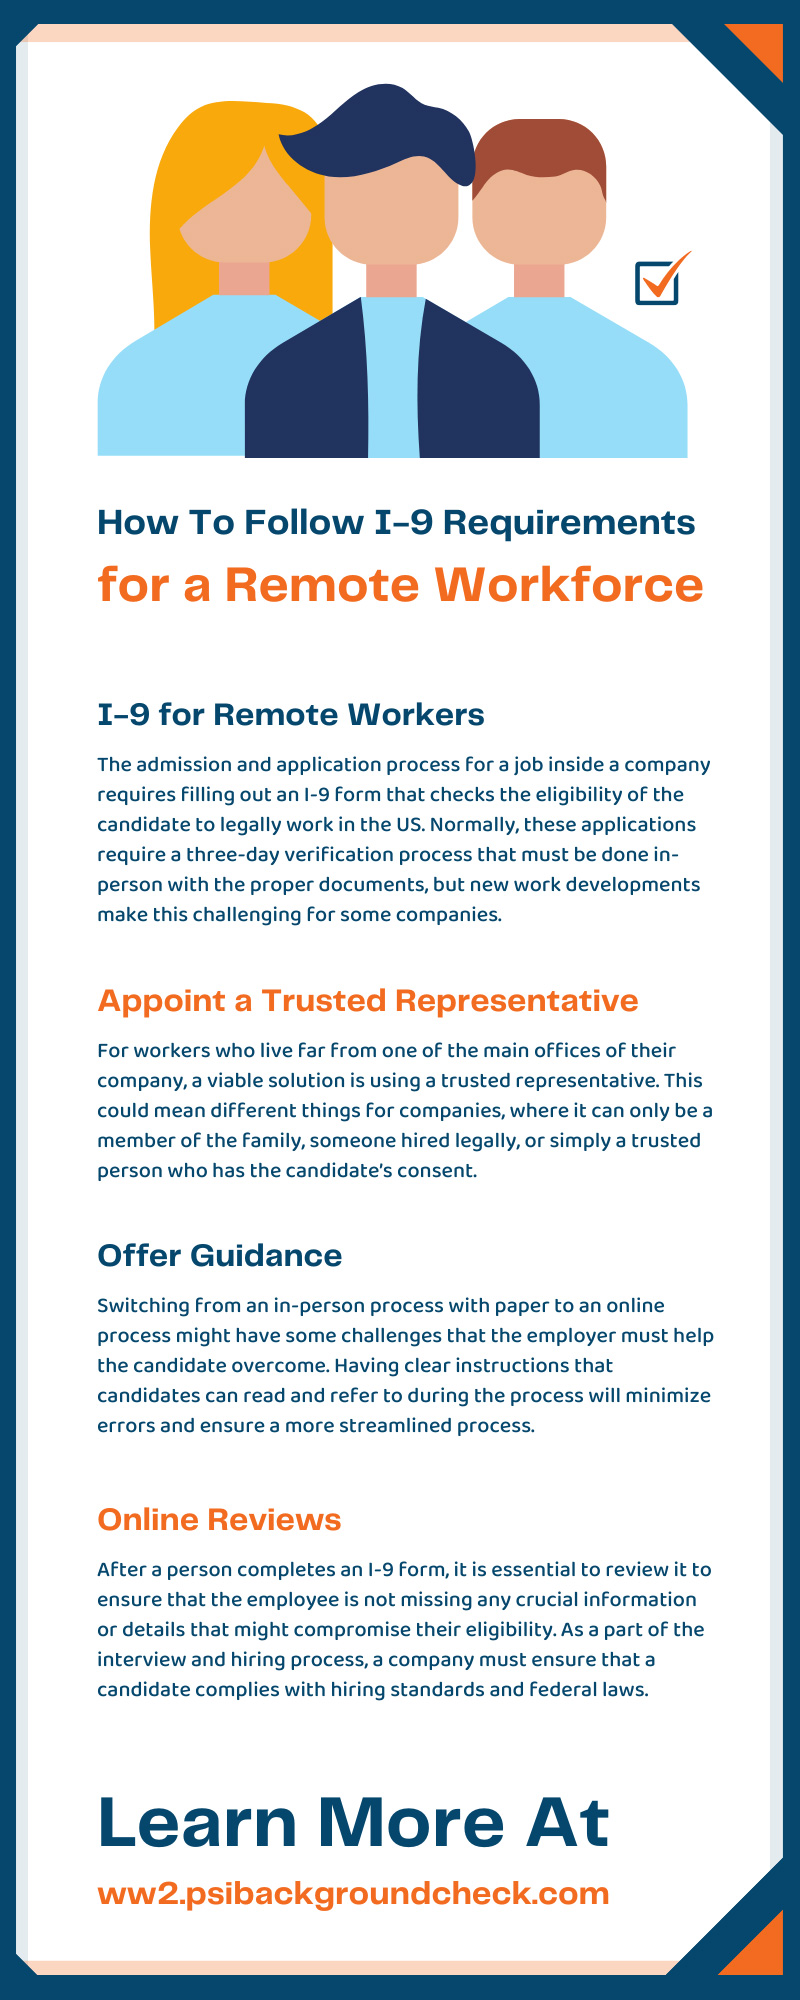 How To Follow I-9 Requirements for a Remote Workforce